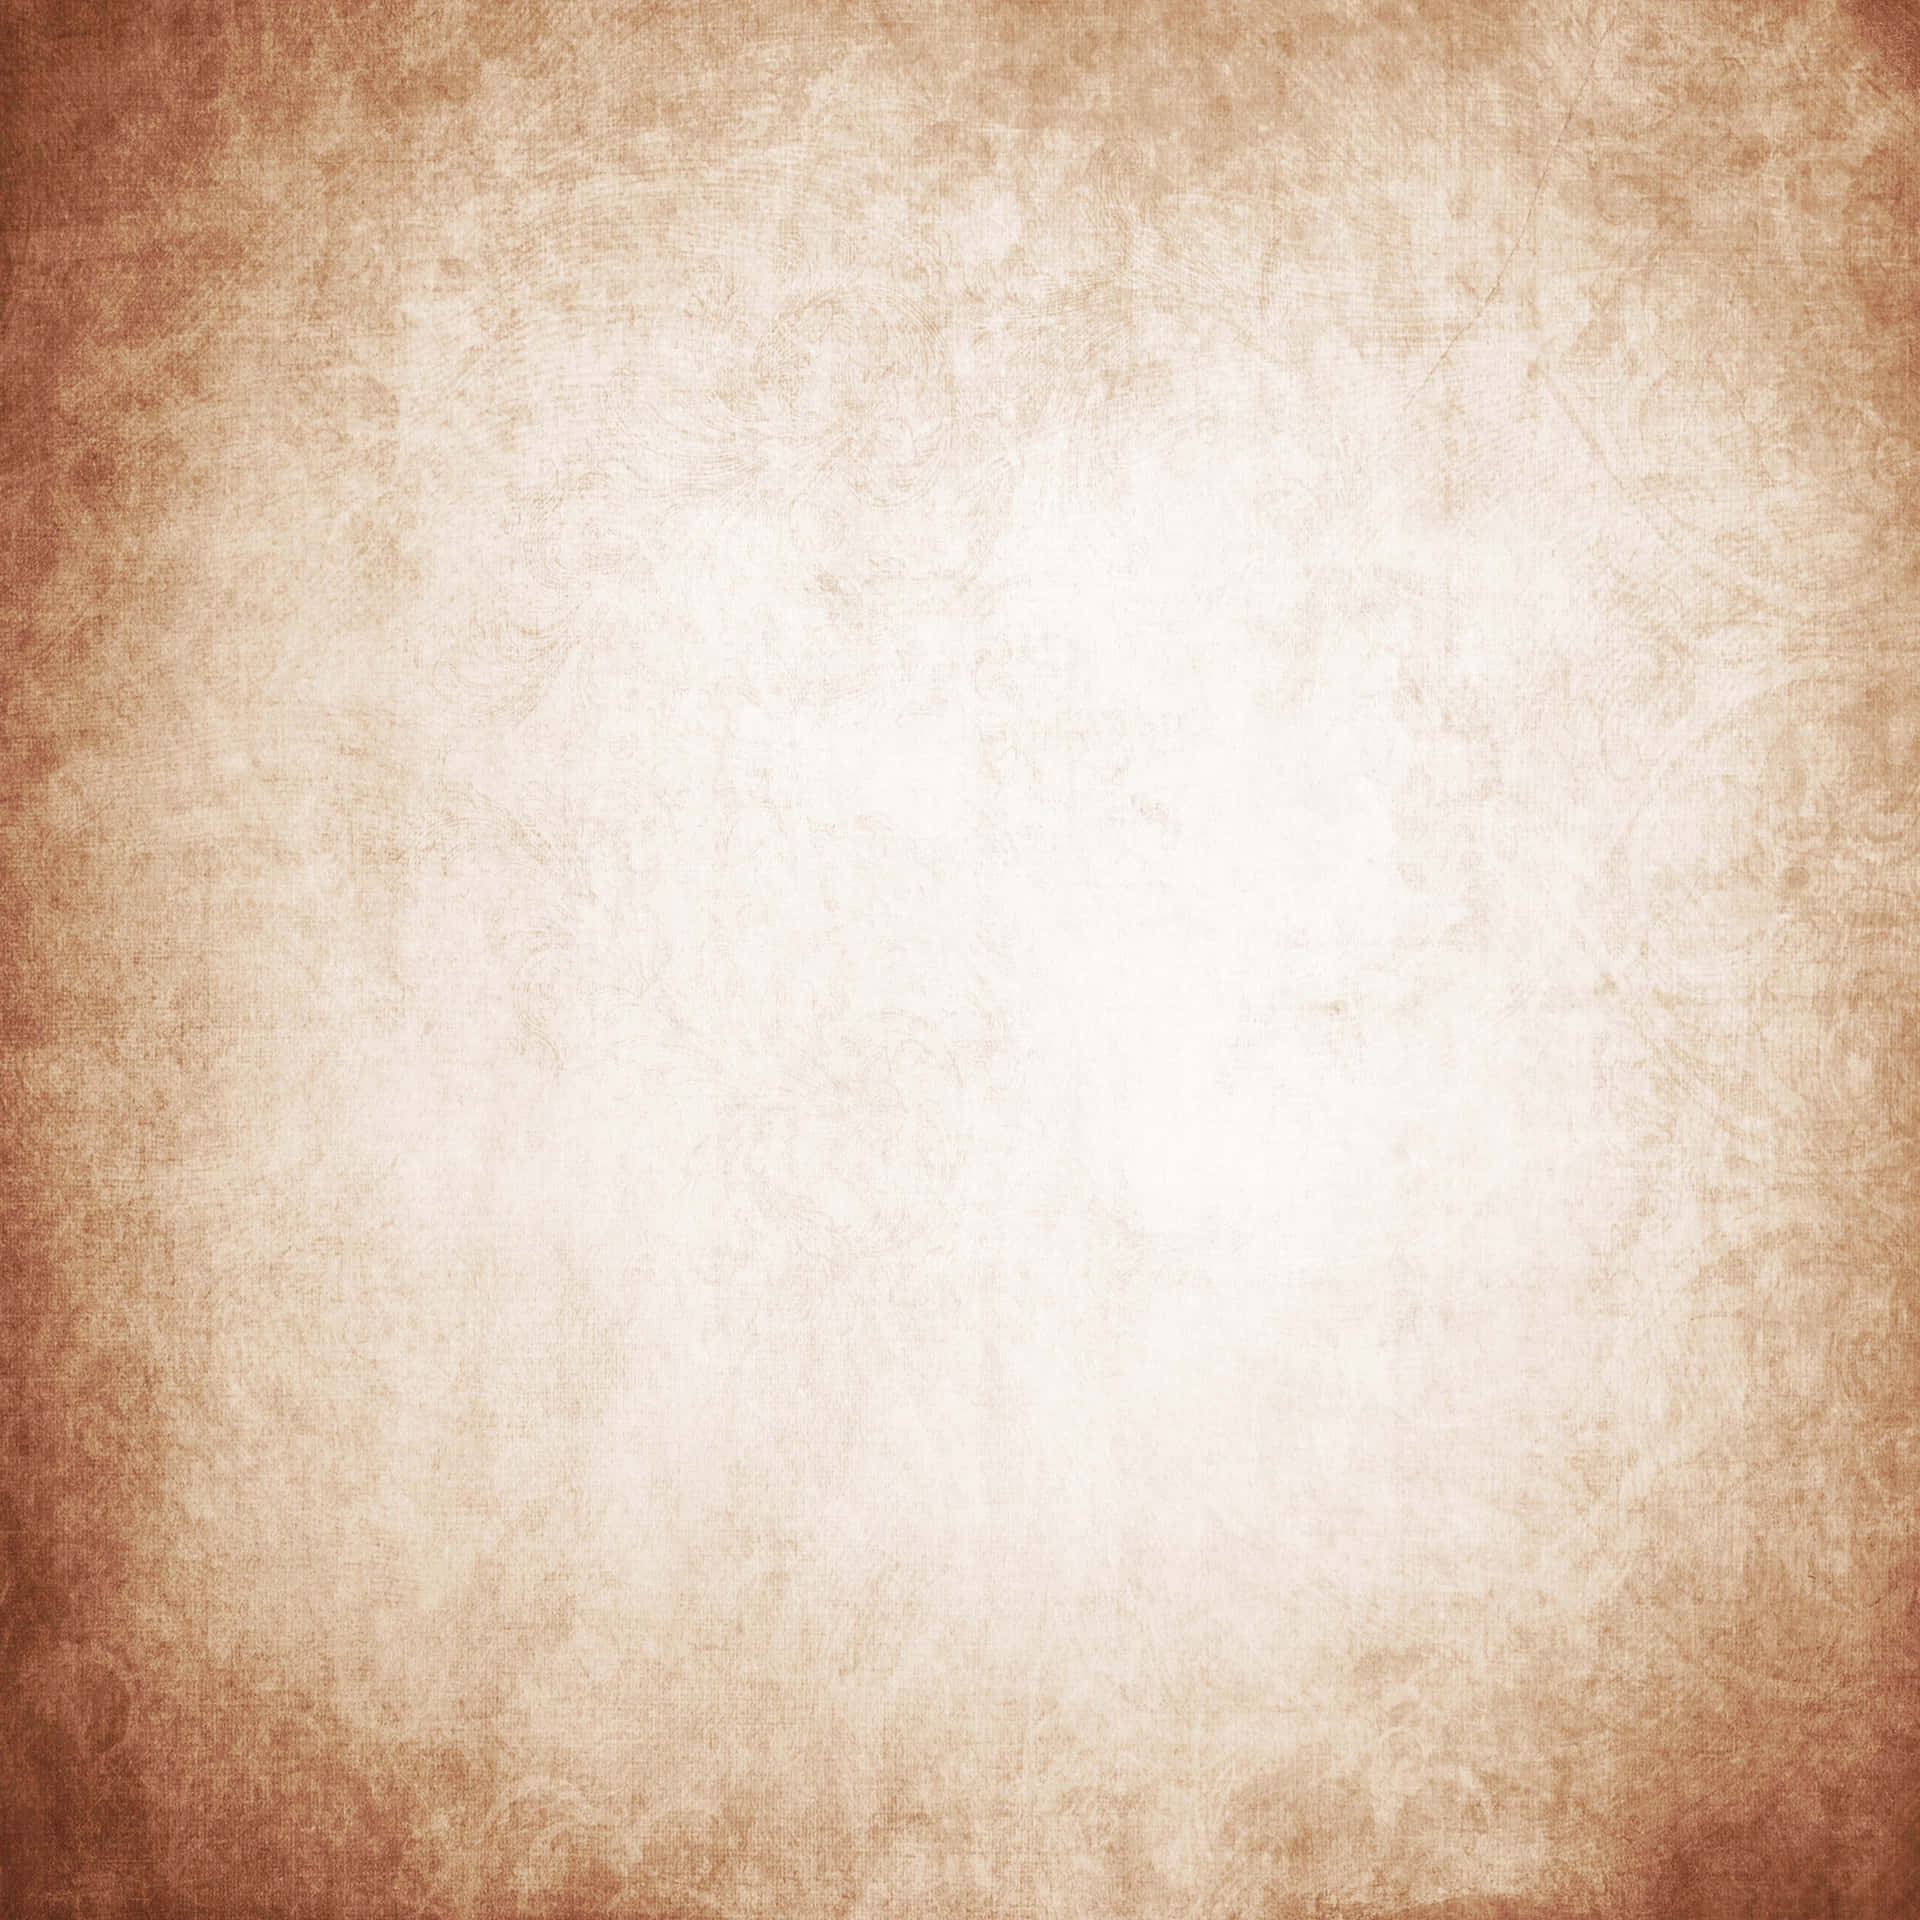 A Brown And White Grunge Background With A White Border